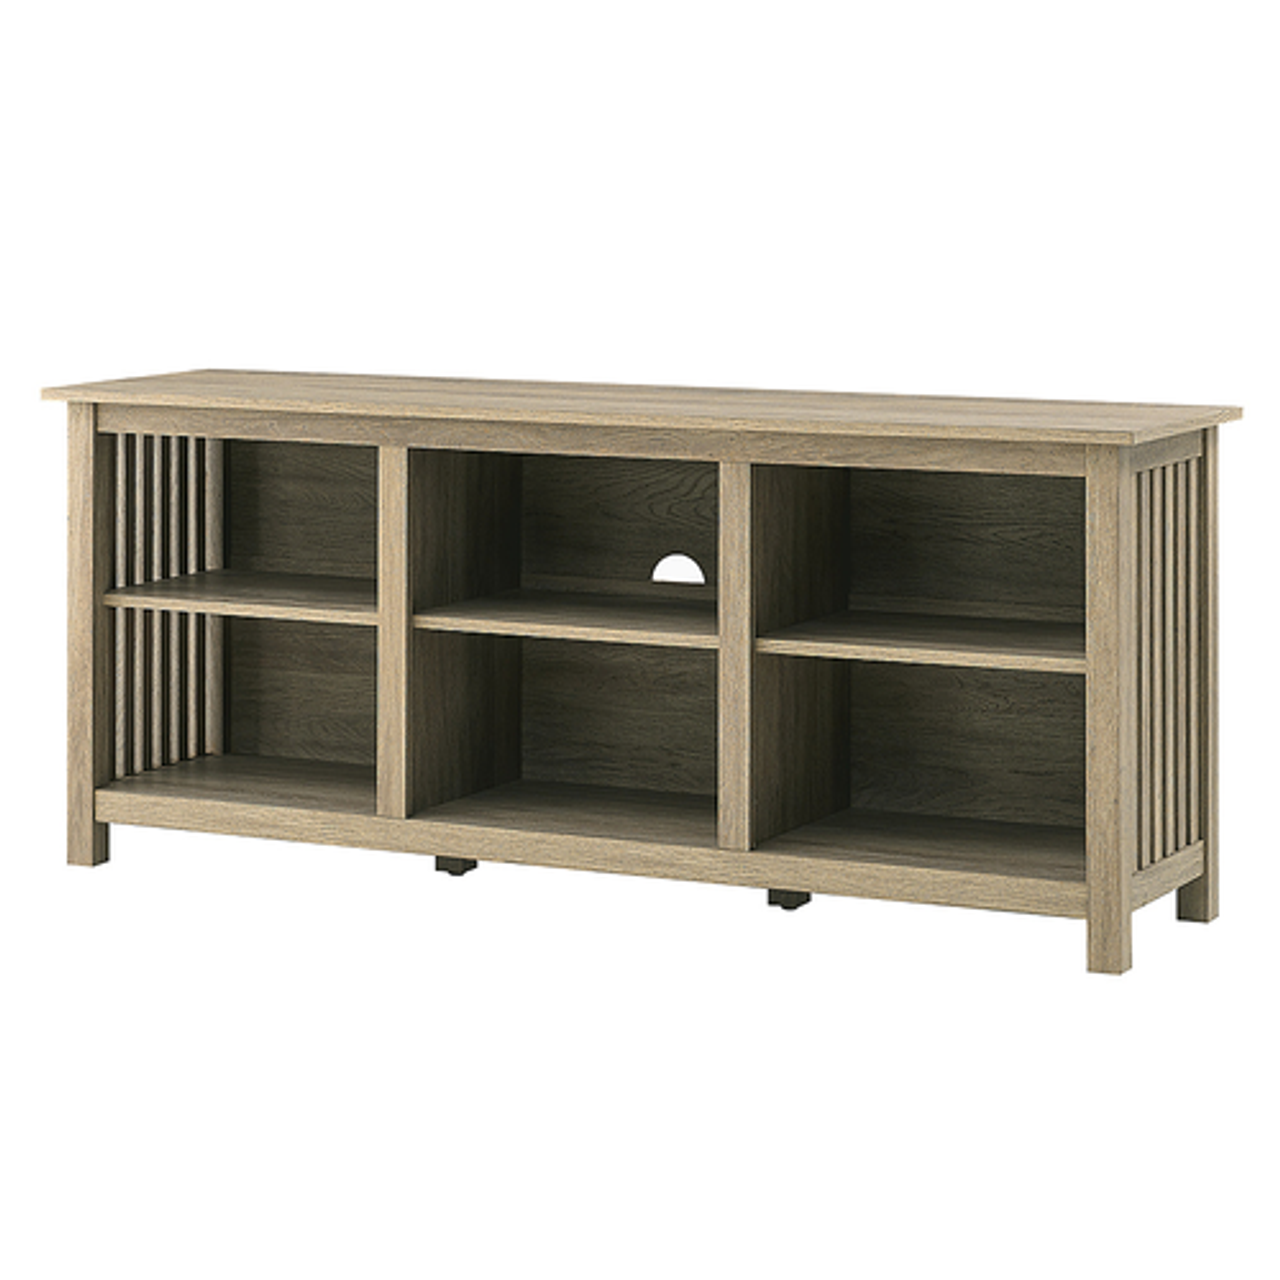 Walker Edison - Mission-Style 6-Cubby TV Stand for TVs up to 65” - Driftwood